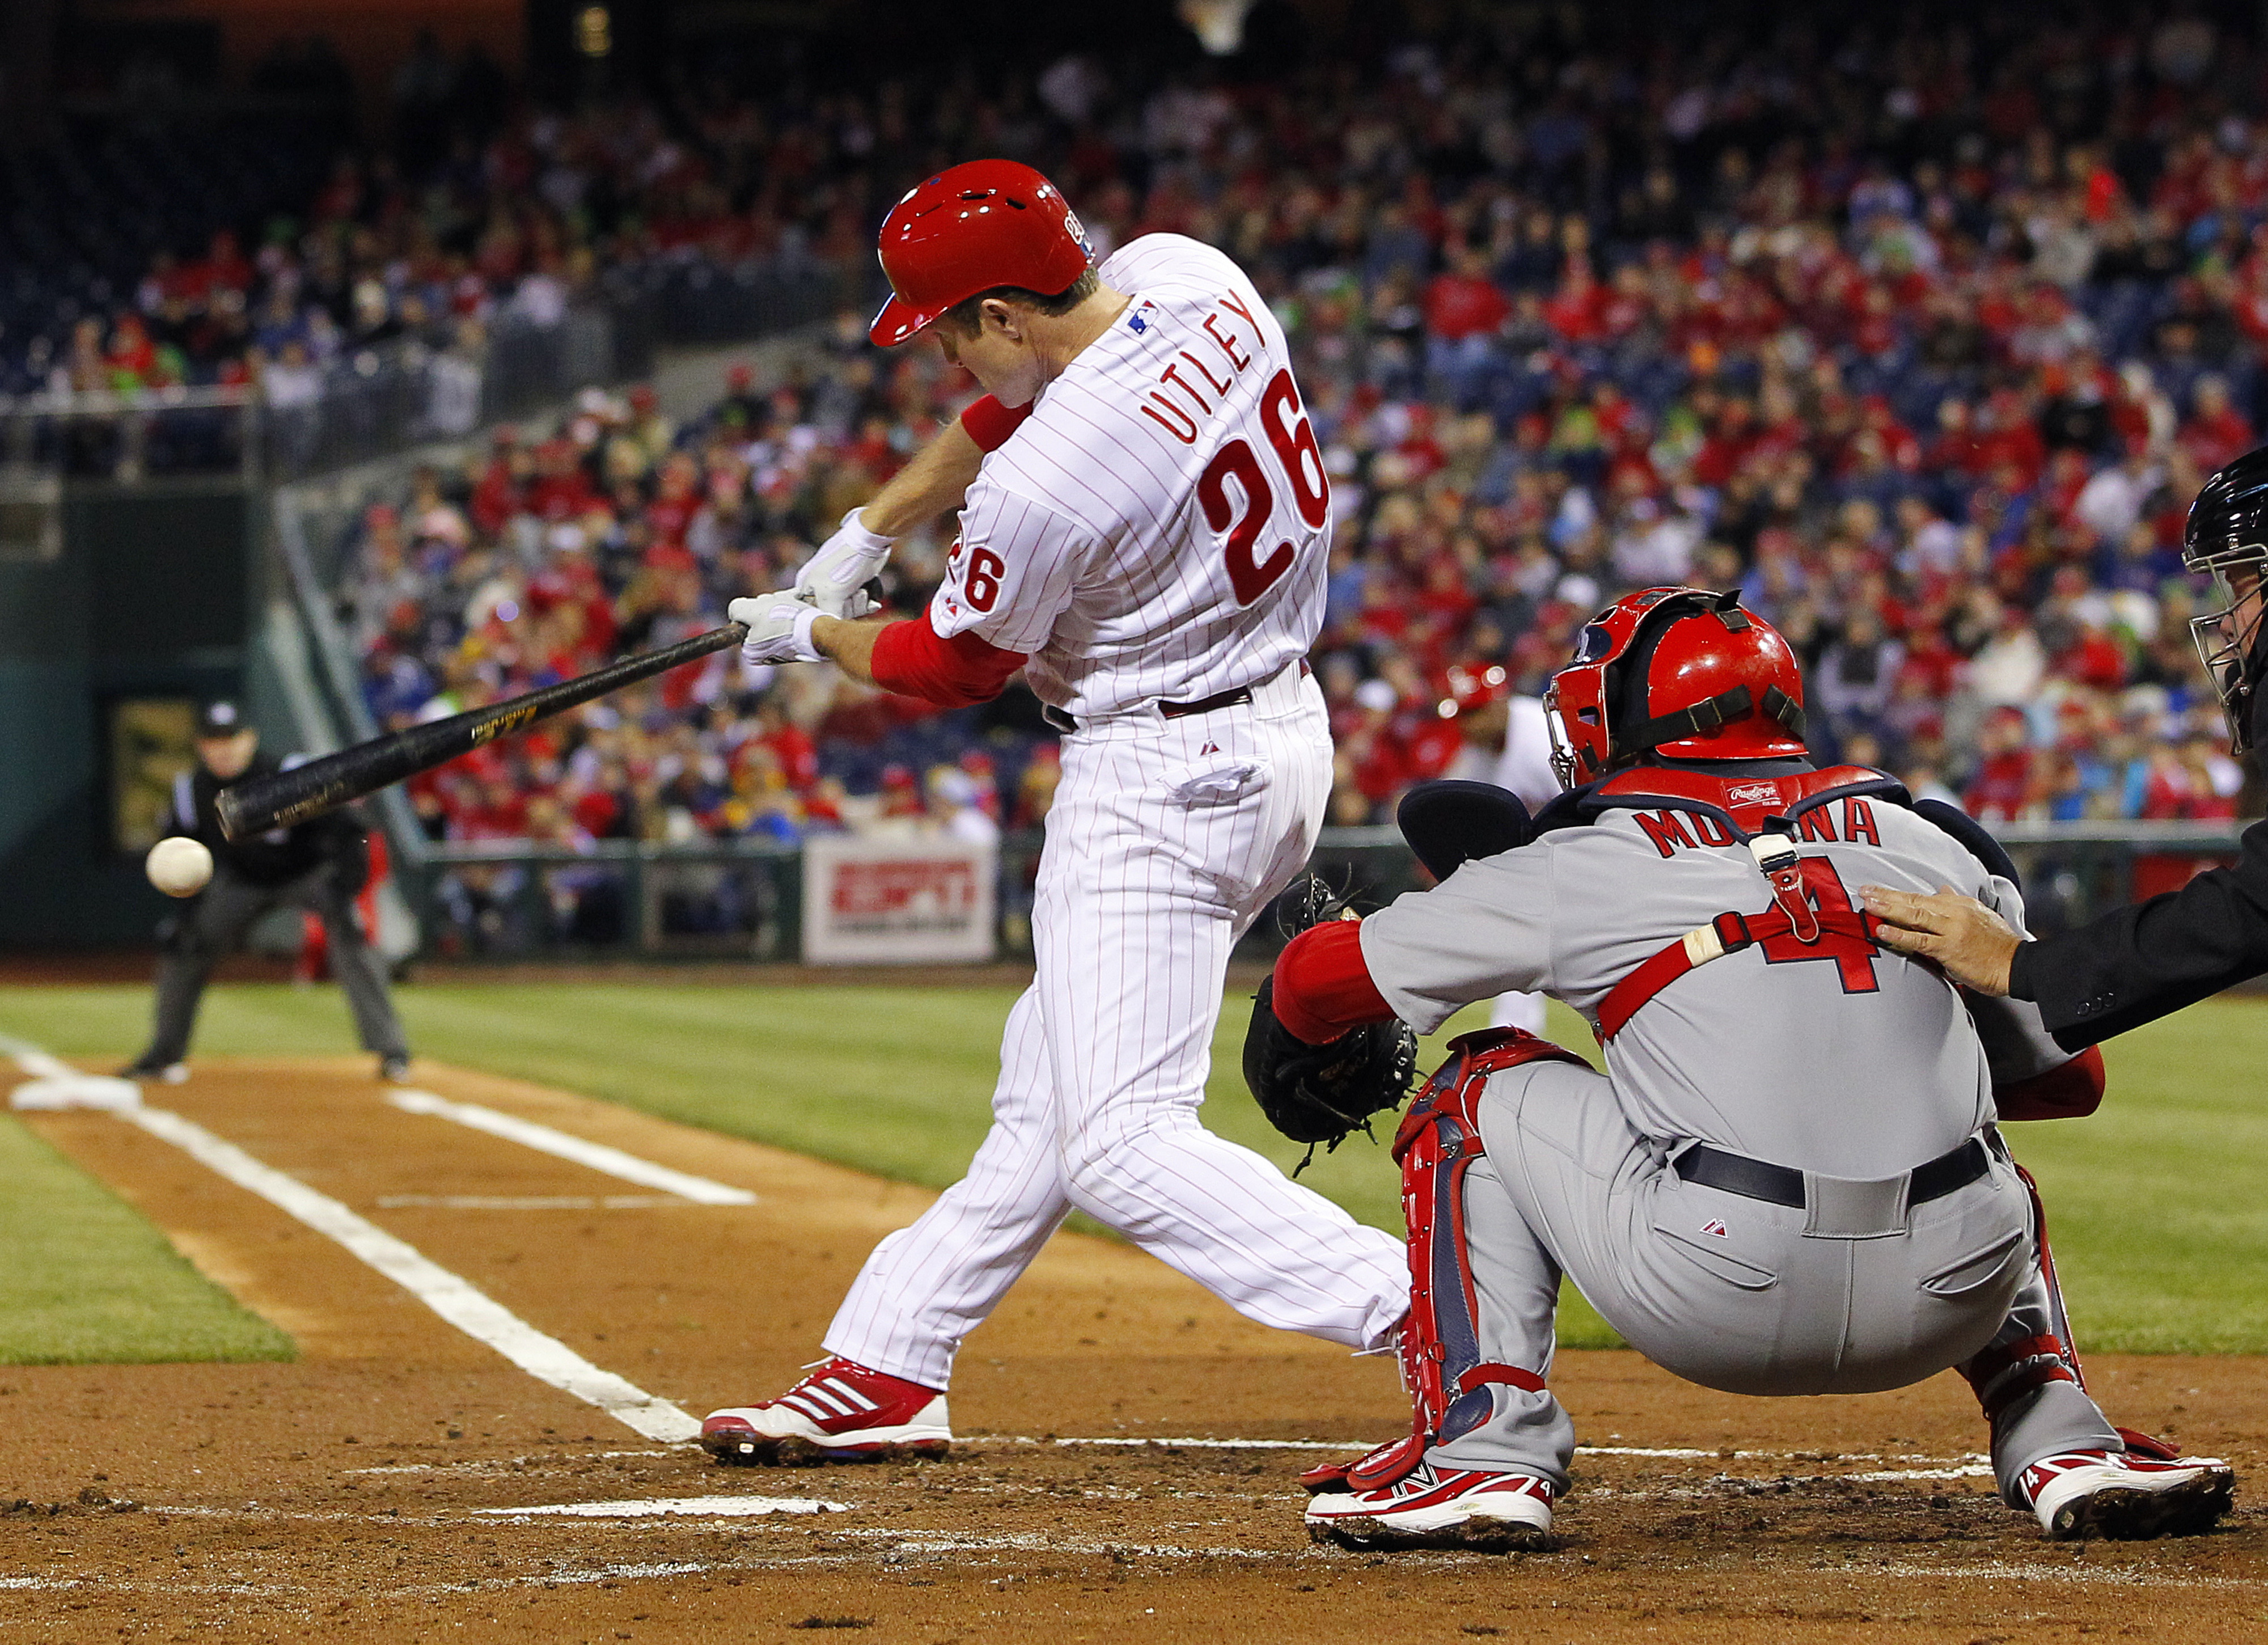 Wallpaperfast Chase Utley Of The Phillies Mlb Photo Html